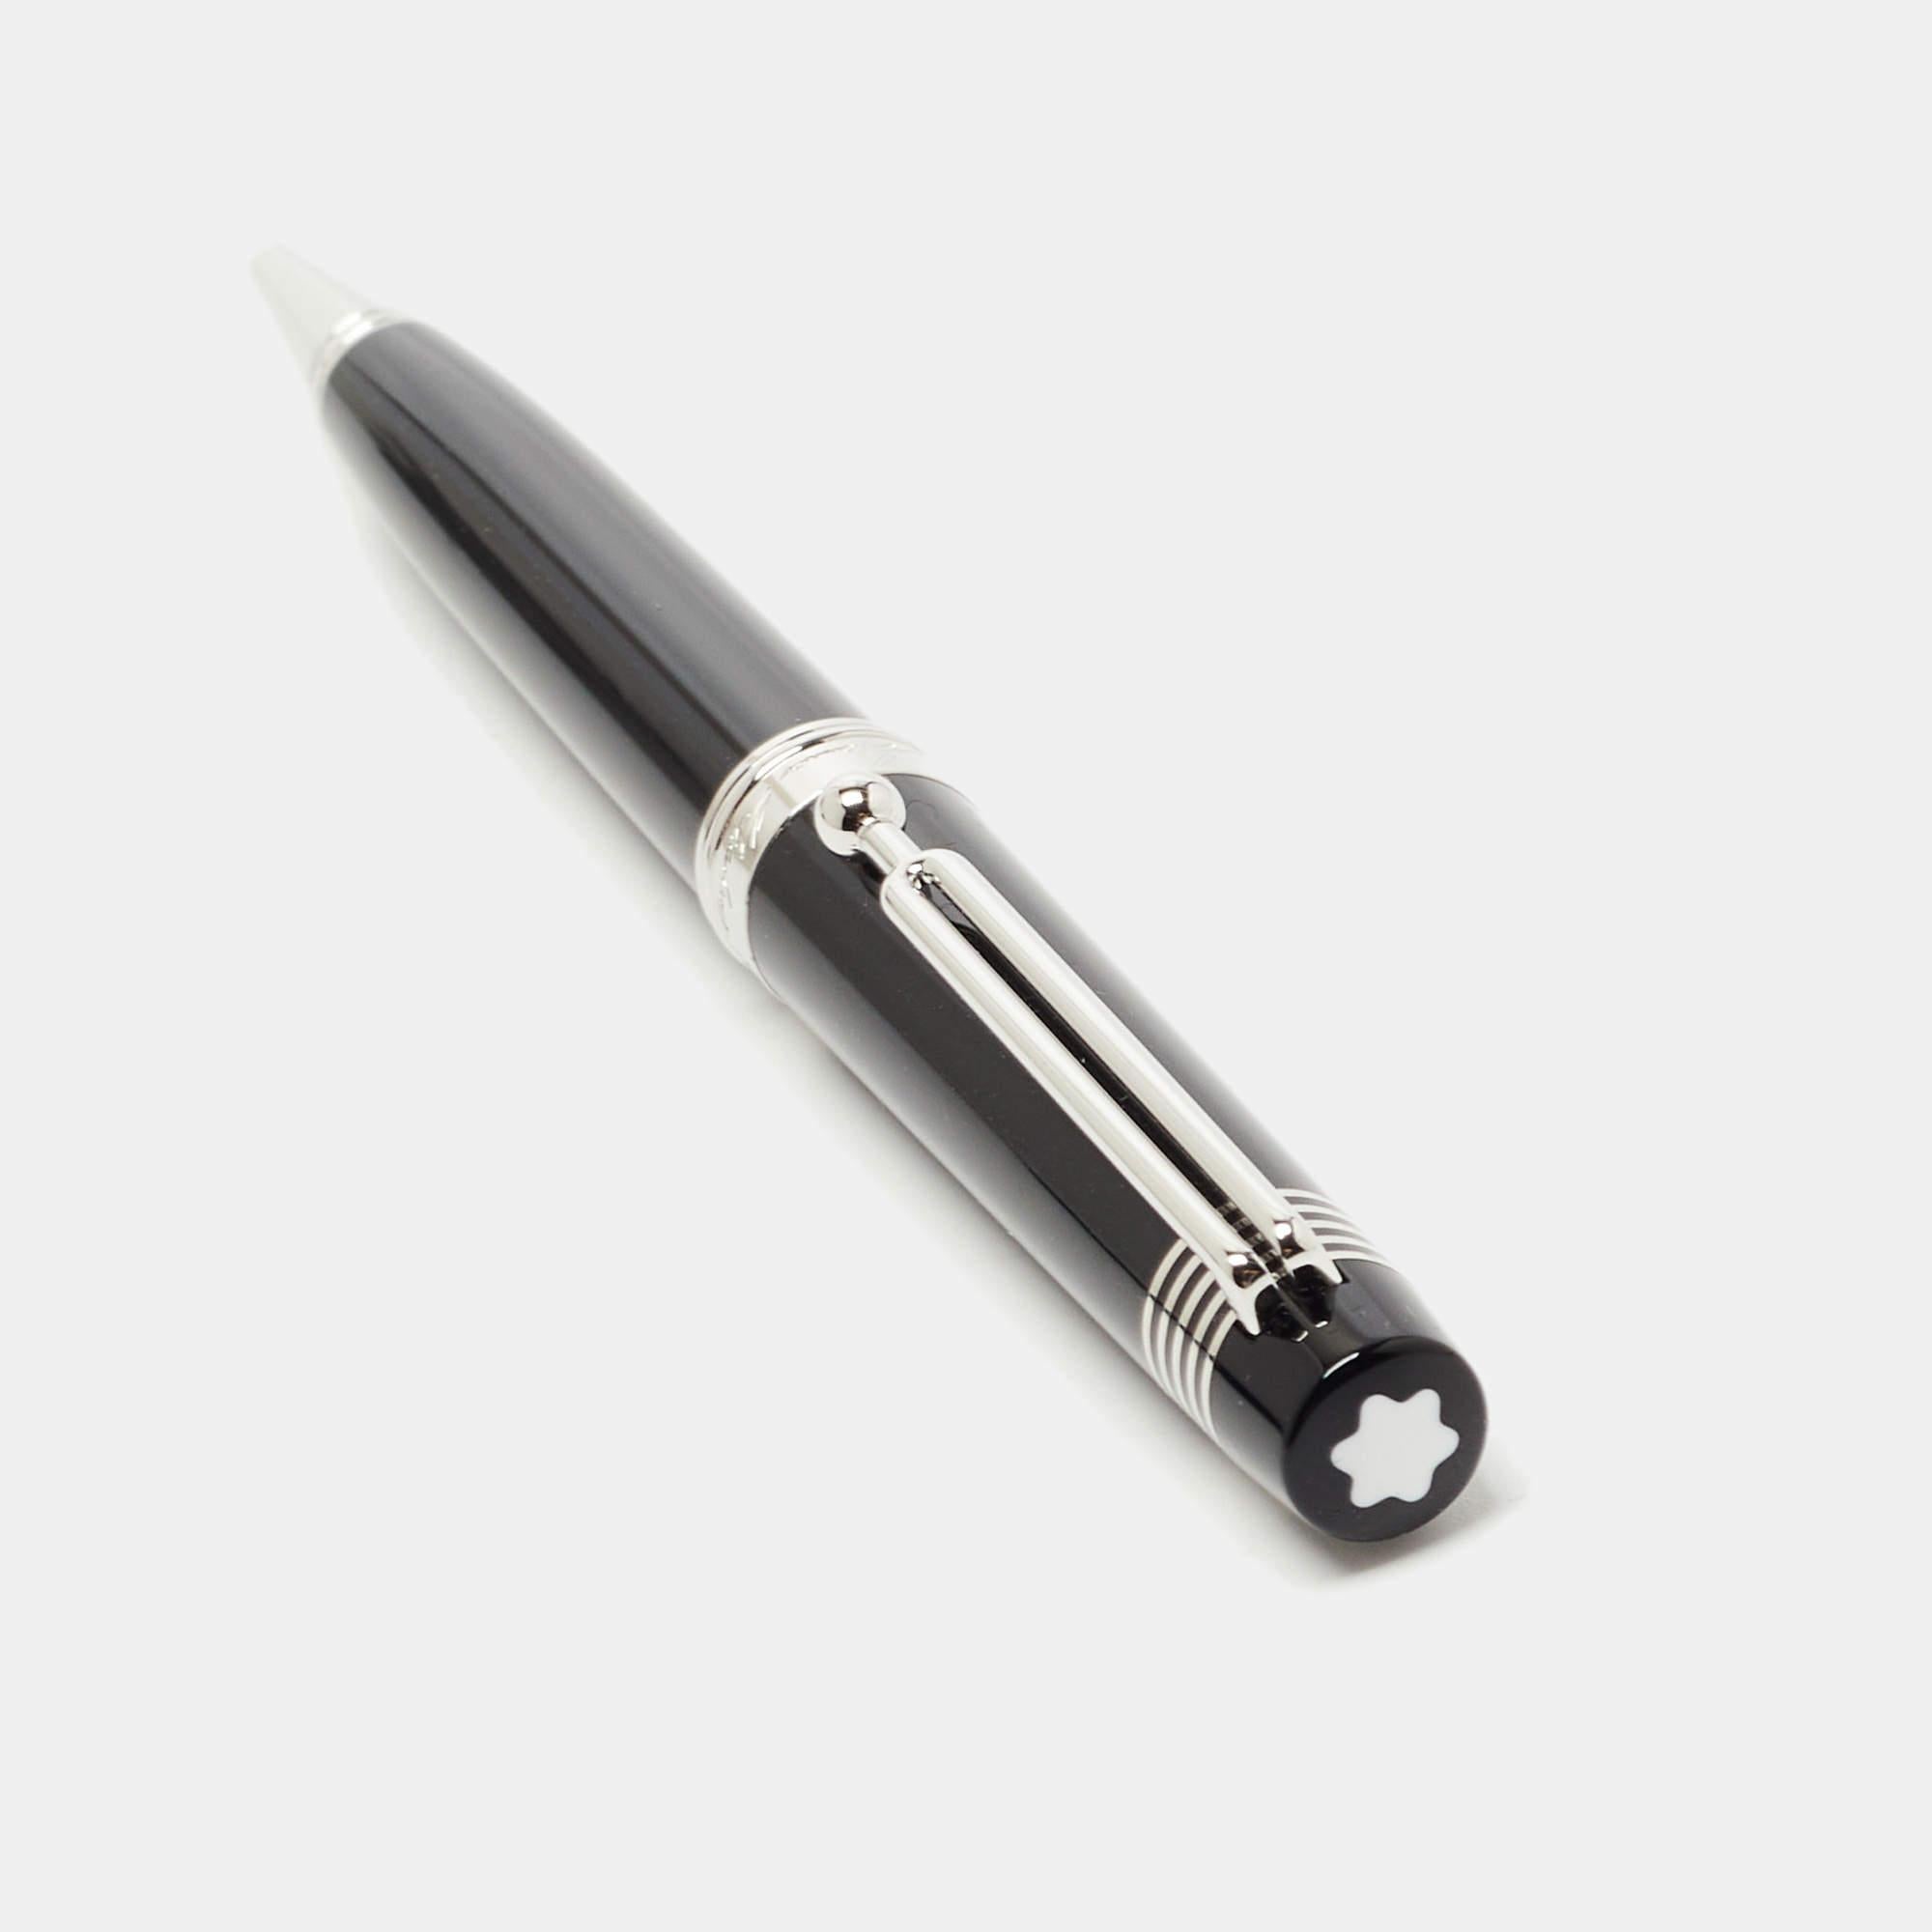 From Montblanc's series of special edition pens comes this gorgeous ballpoint pen set made in honor of Johannes Brahms, who was a German composer and pianist. It is crafted in resin and has metal fittings for a luxe finish.

Includes: Original Case,